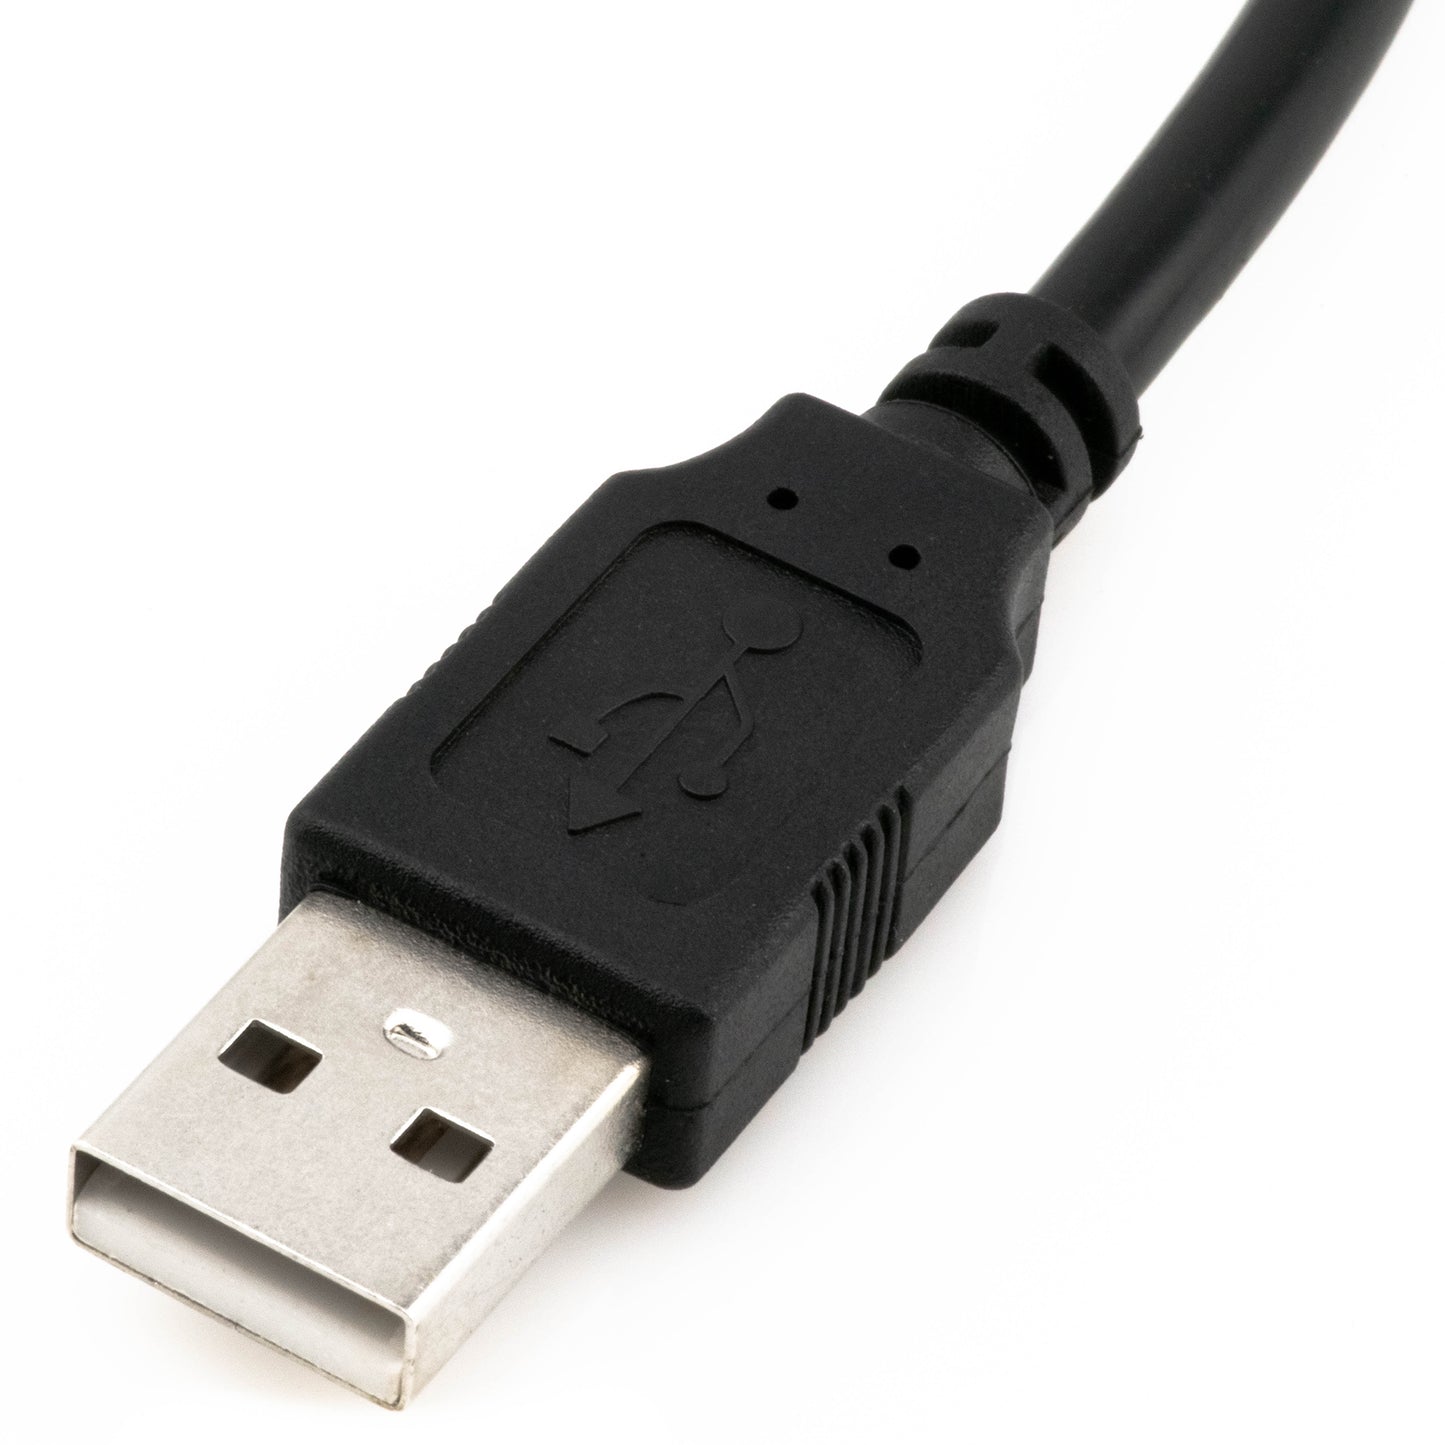 9-Pin USB 2.0 Motherboard Header to USB Type A Adapter Cable